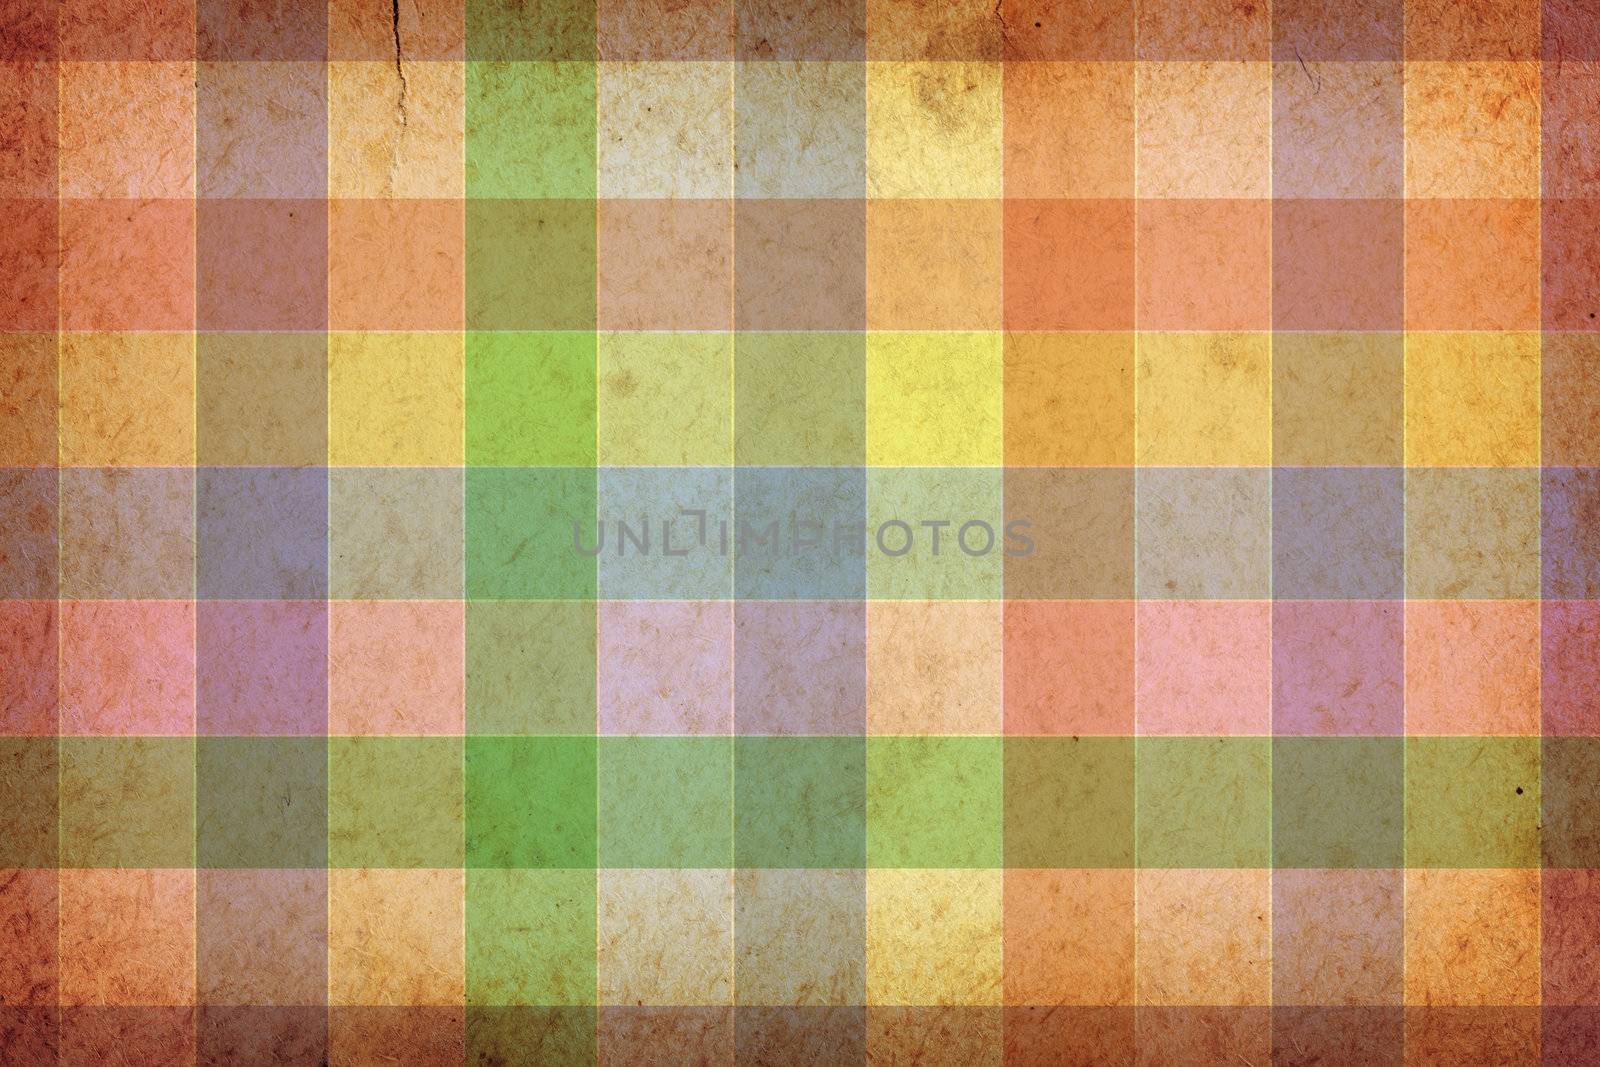 Retro paper background. Vintage style colorful grid